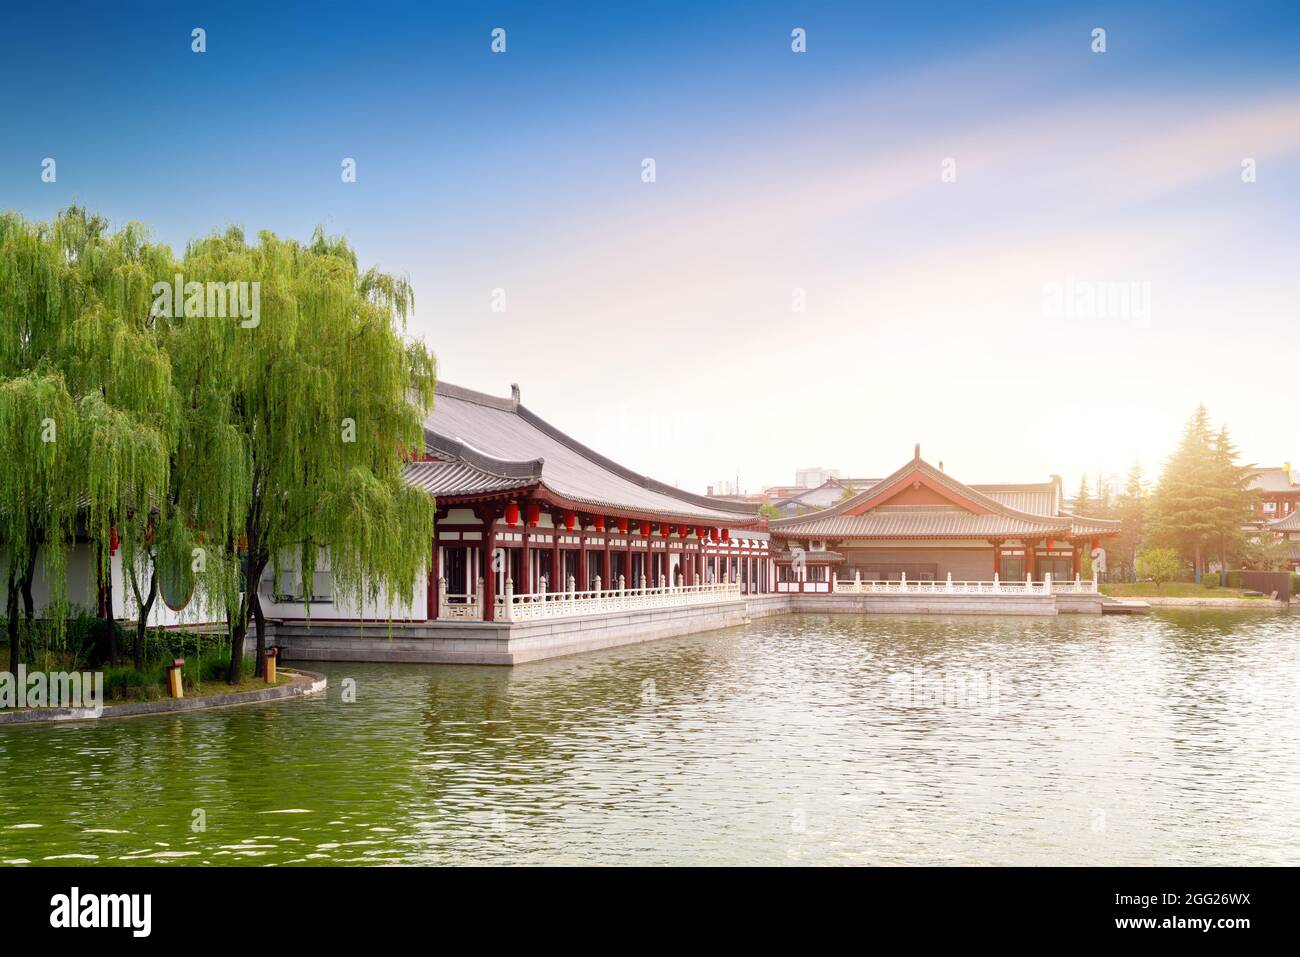 xi 'an datang furong park scenic spot scenery, this is a famous tourist scenic spot. Xi'an, China. Stock Photo